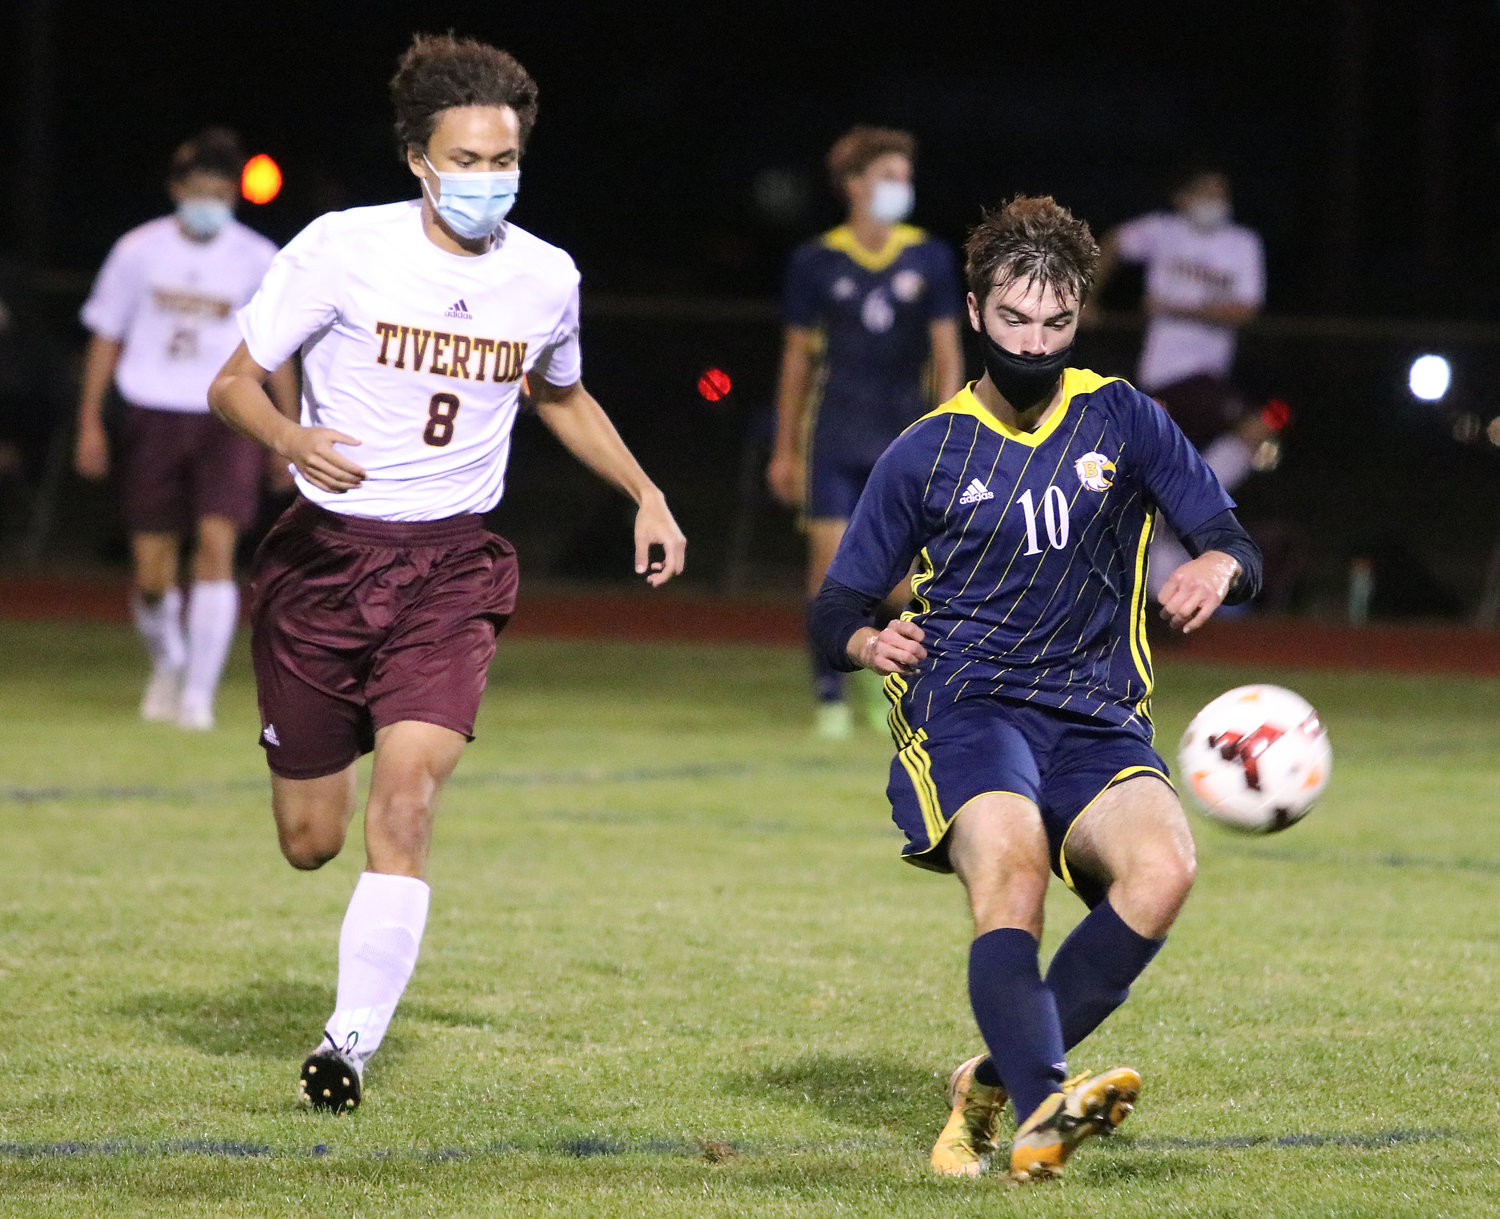 Barrington High School's Nick Rockwell passes the ball during the Eagles 0-0 tie against Tiverton.